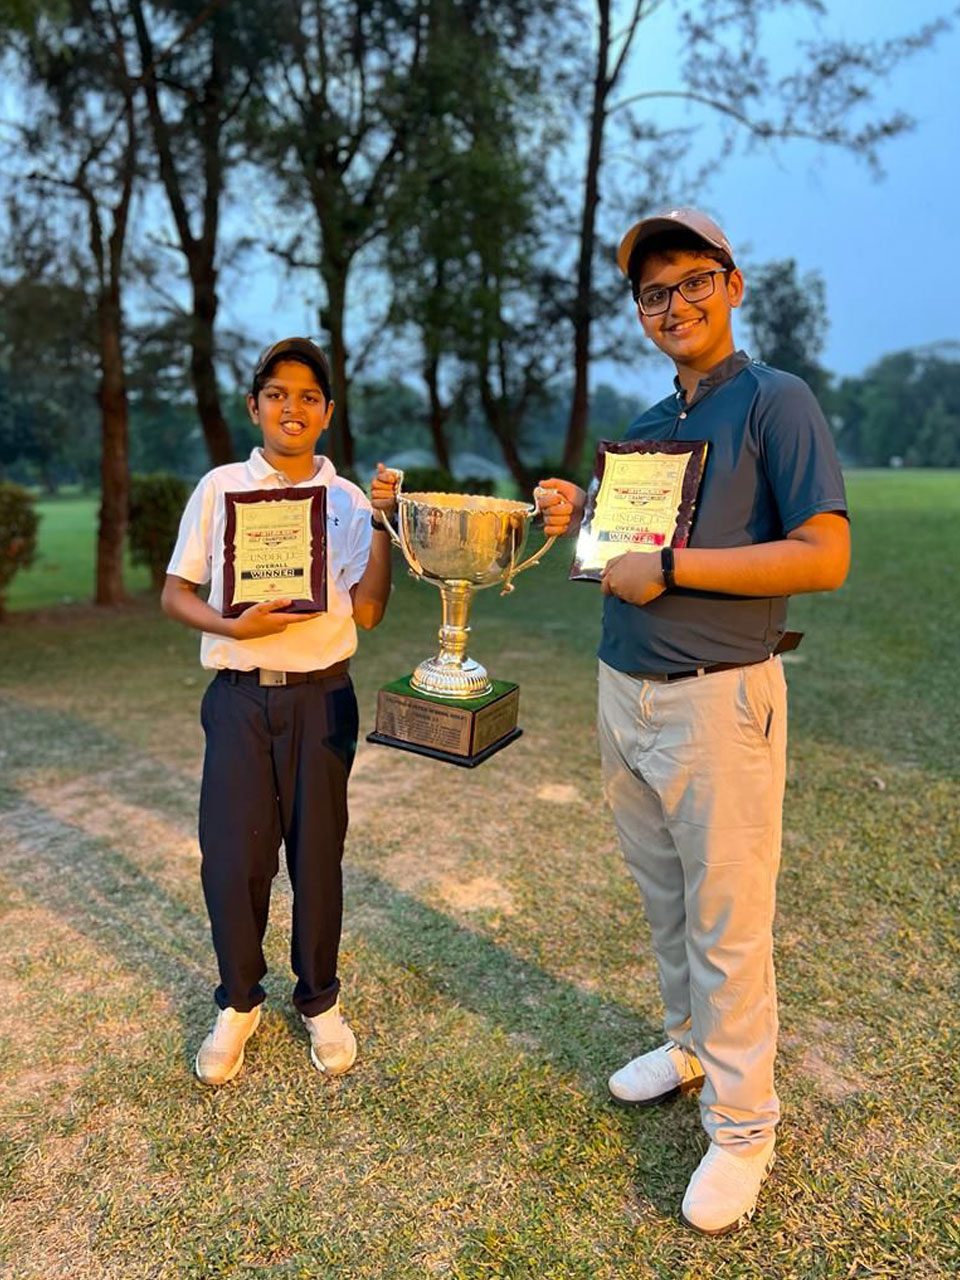 Hredaan led his team to victory in the 2022 Inter School Golf Championship